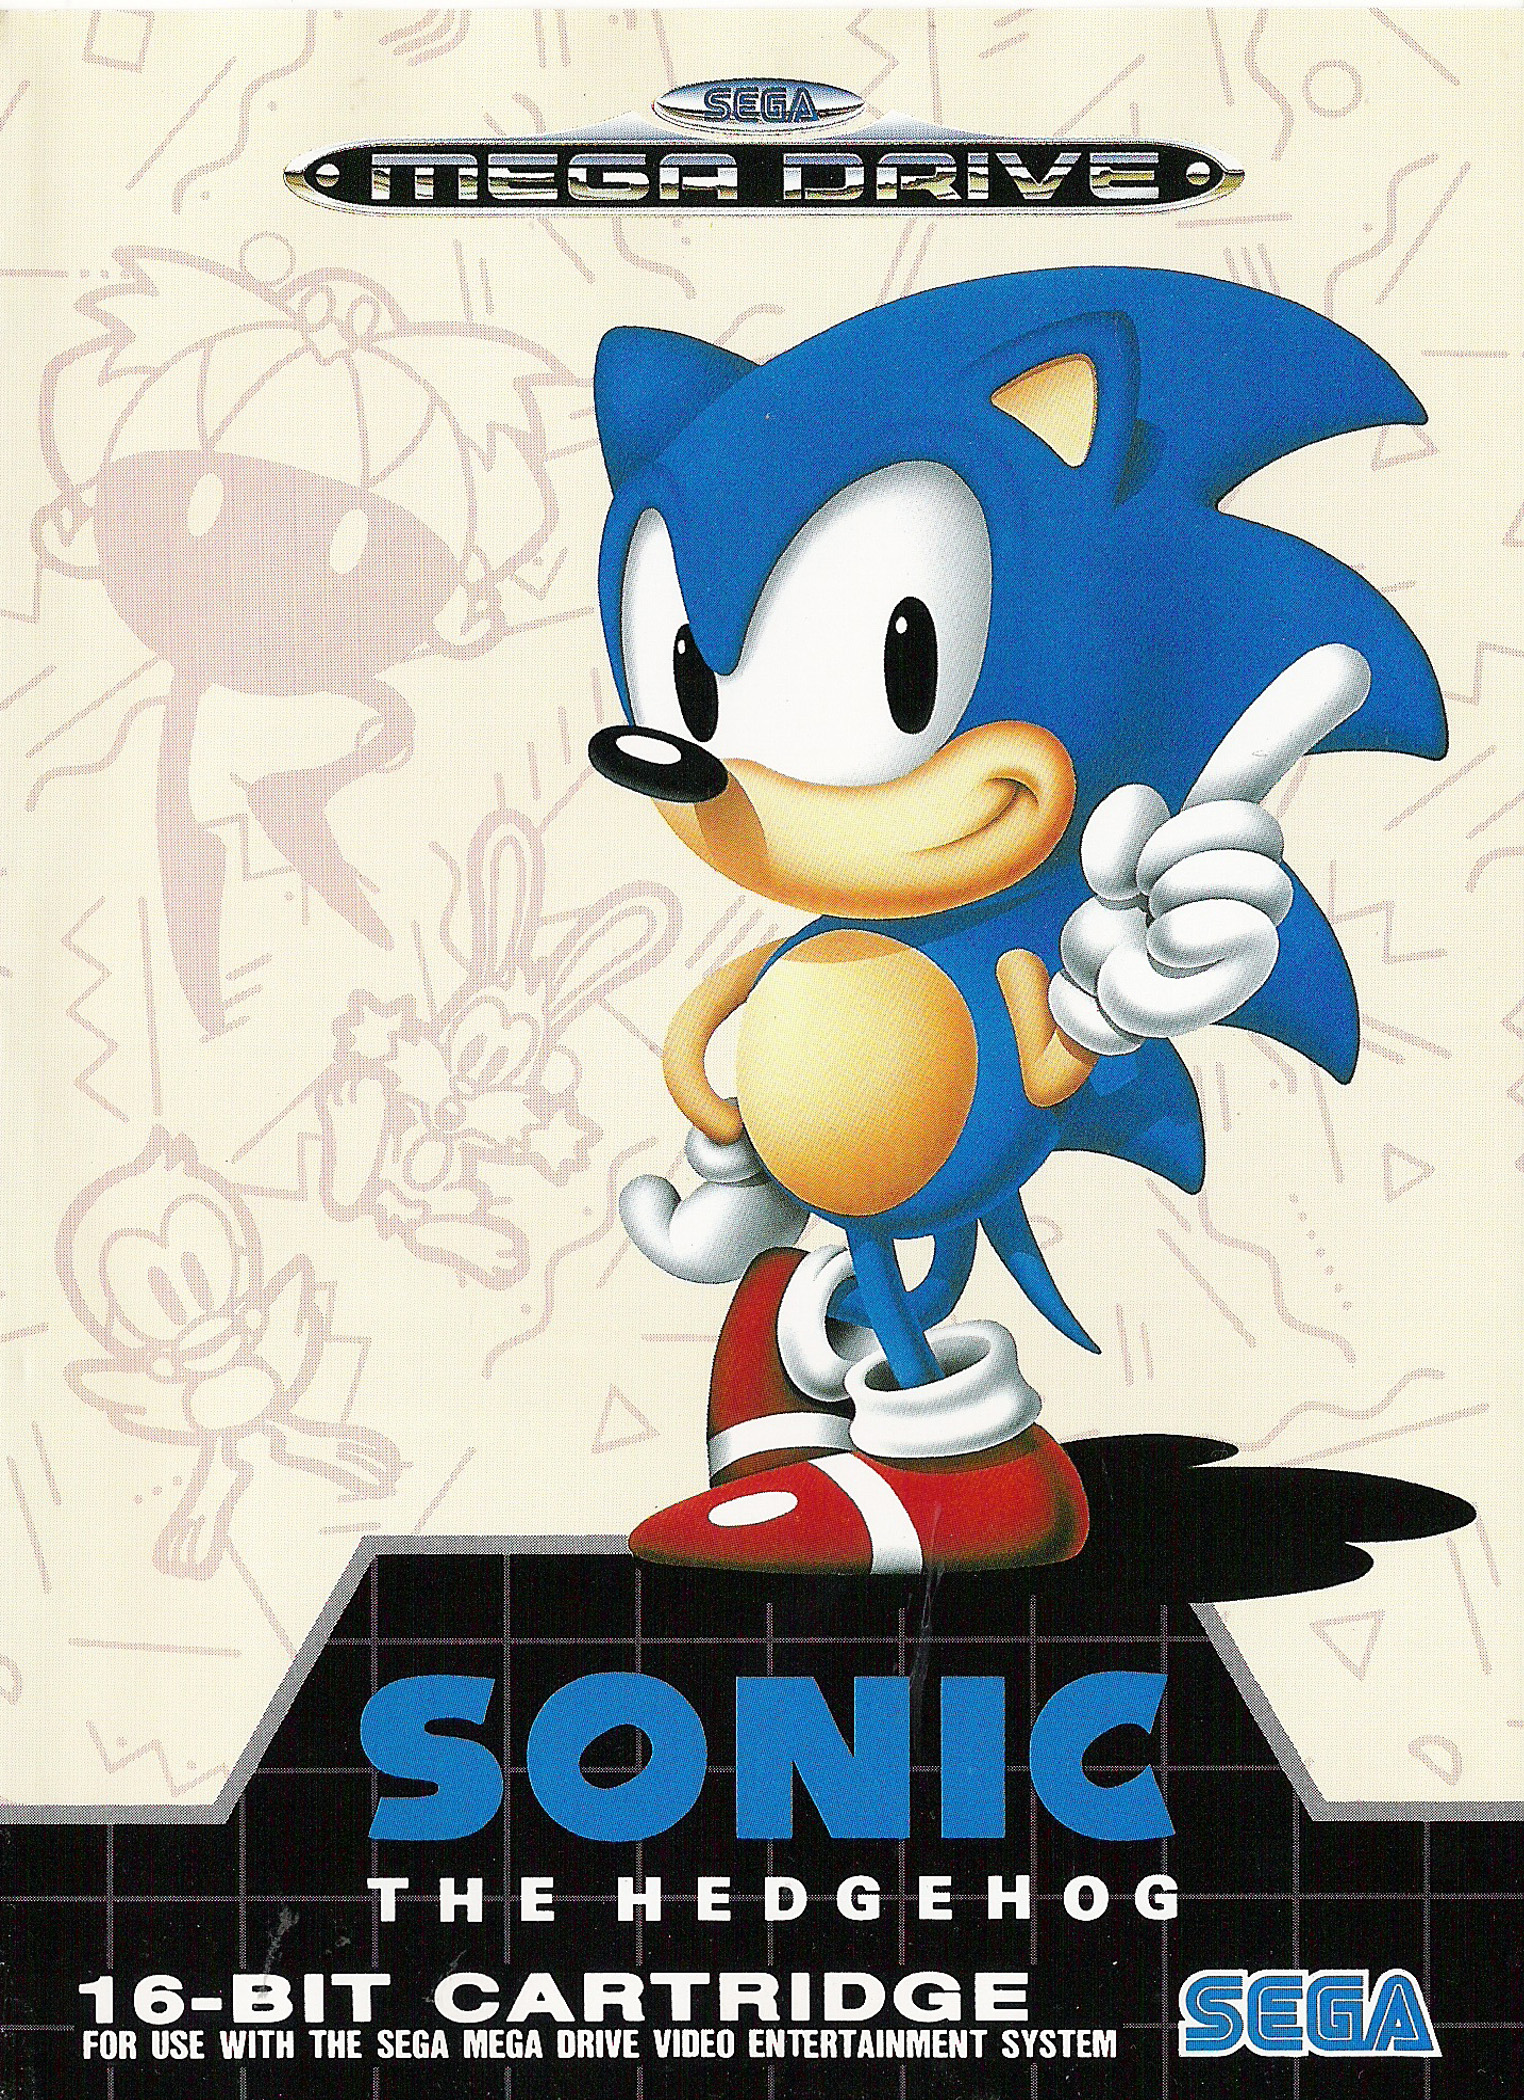 http://images1.wikia.nocookie.net/__cb20110104044009/sonic/images/b/b1/Sonic-the-Hedgehog-Cover.png